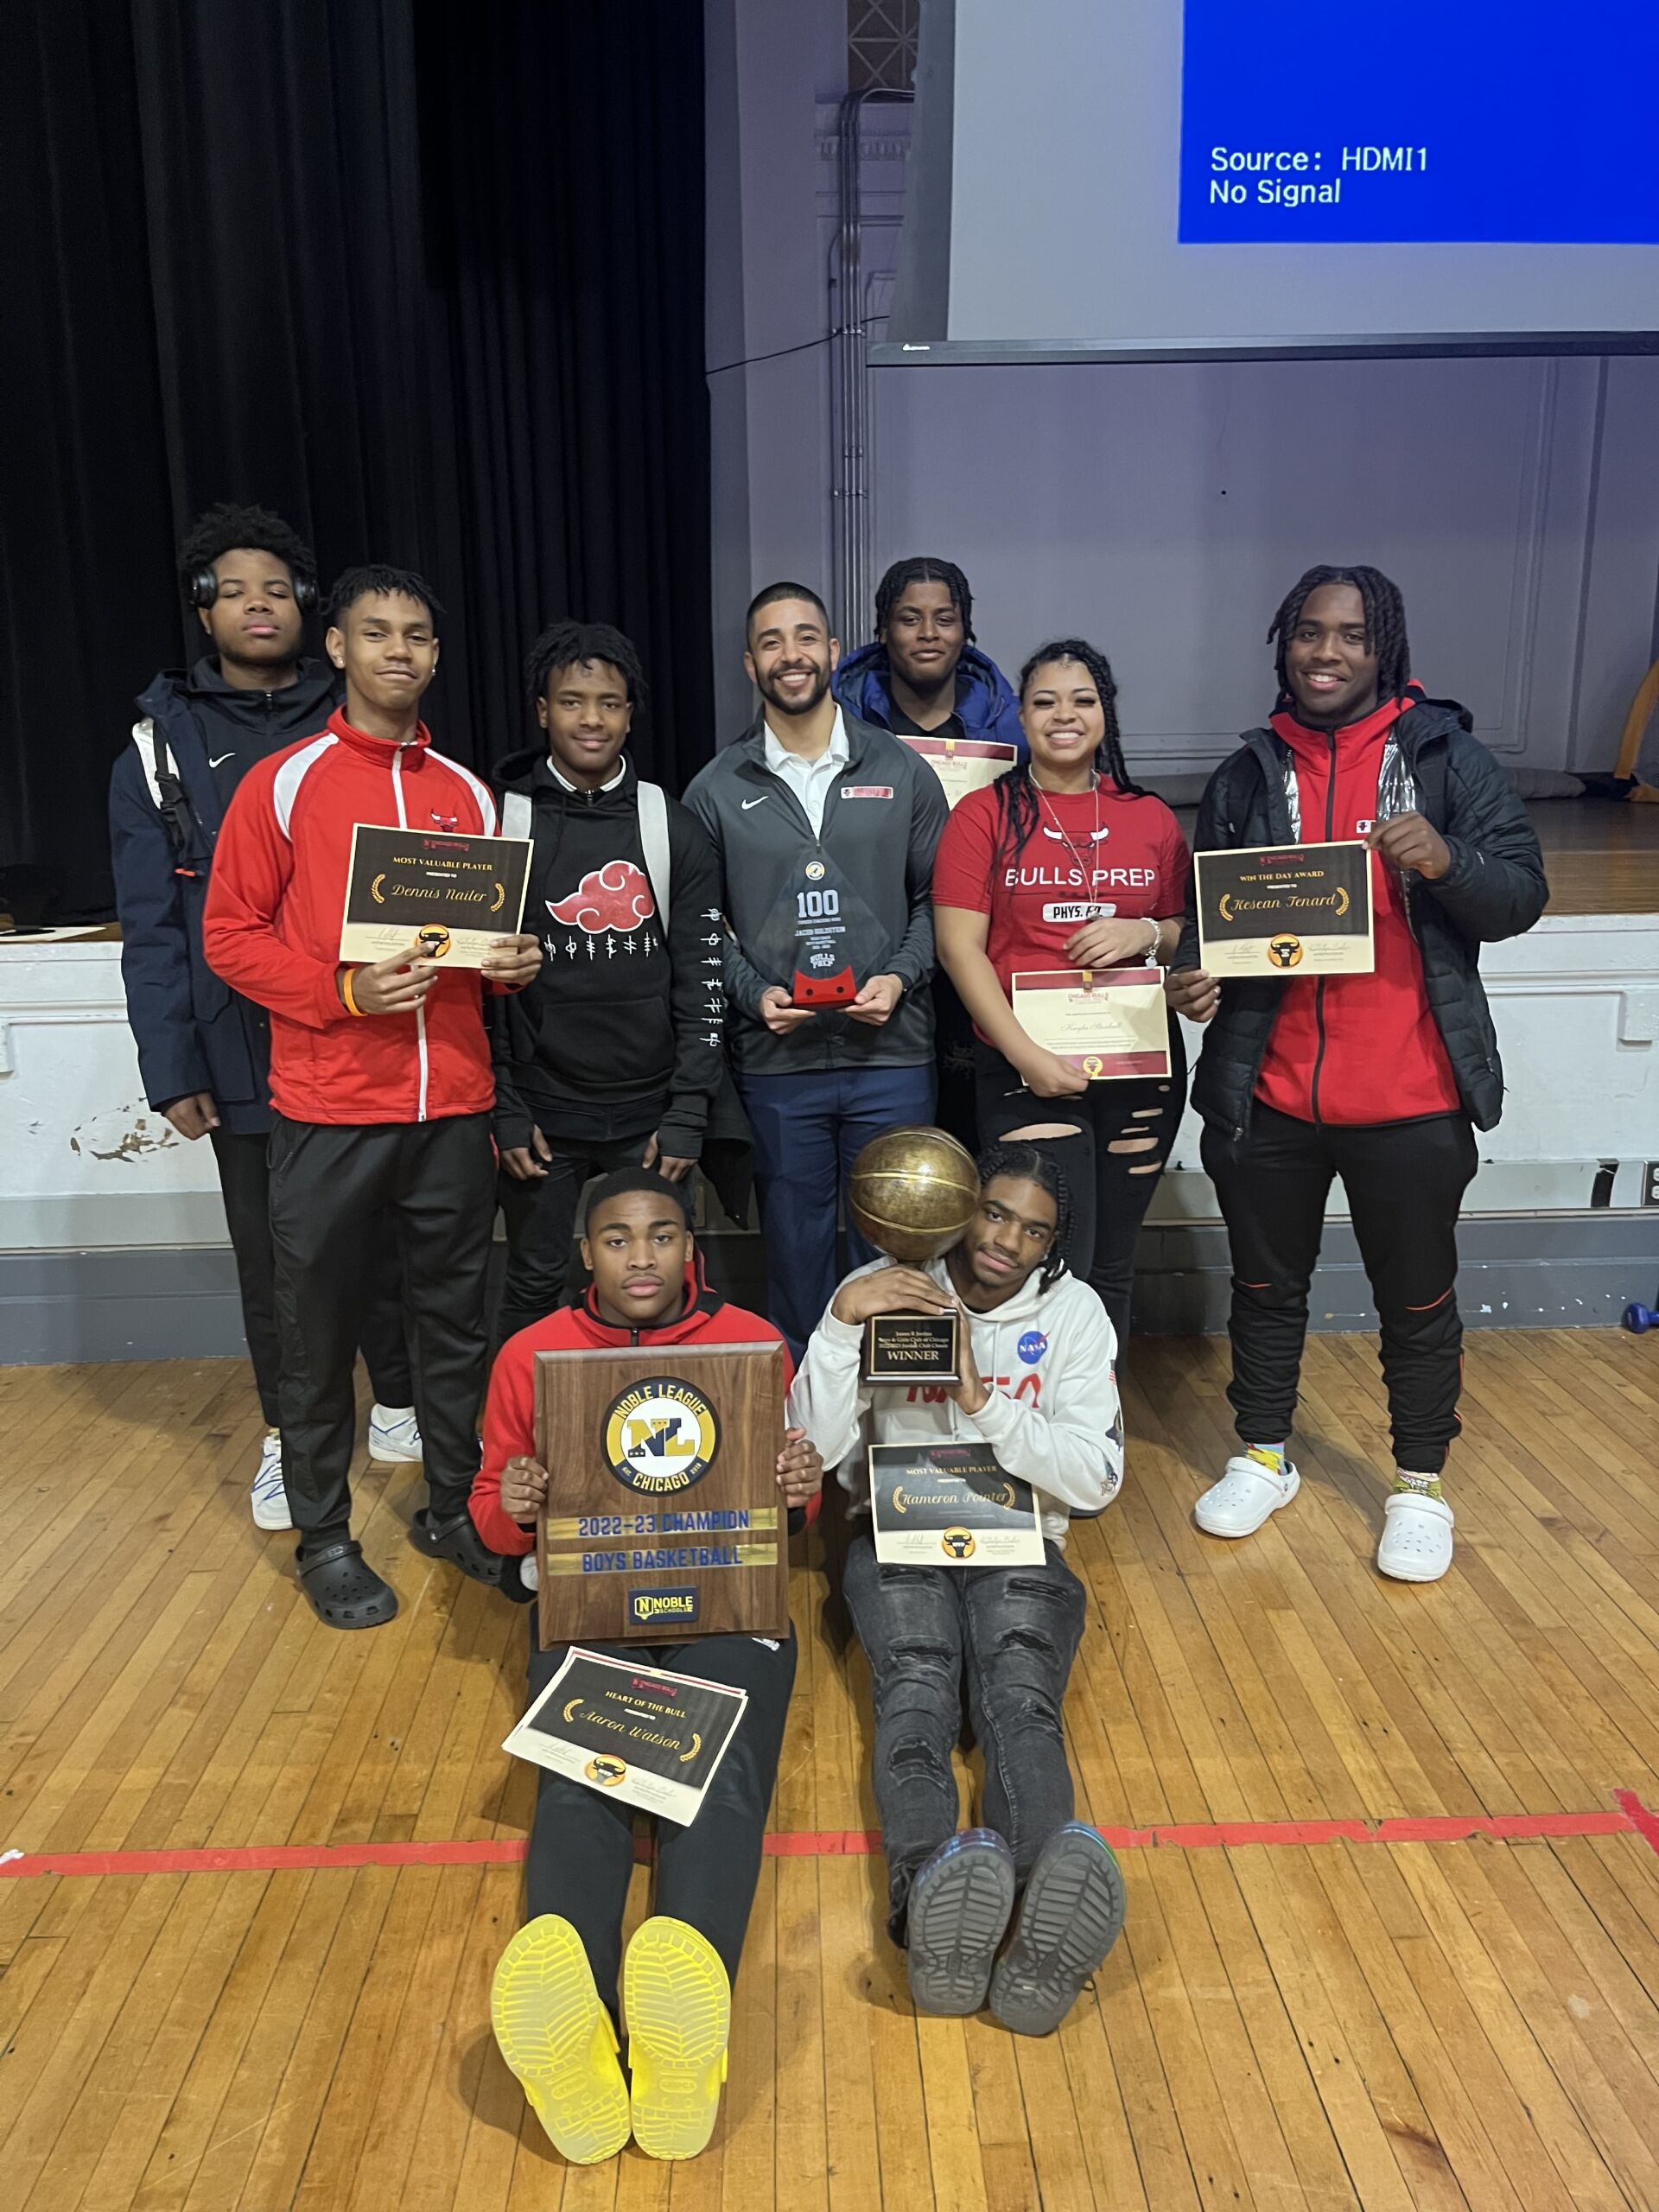 A few members of the Chicago Bulls College Prep basketball team pose with their trophies. They smile at the camera as they crowd around Mr. Goldestein, who is also holding an award for their 100th win.